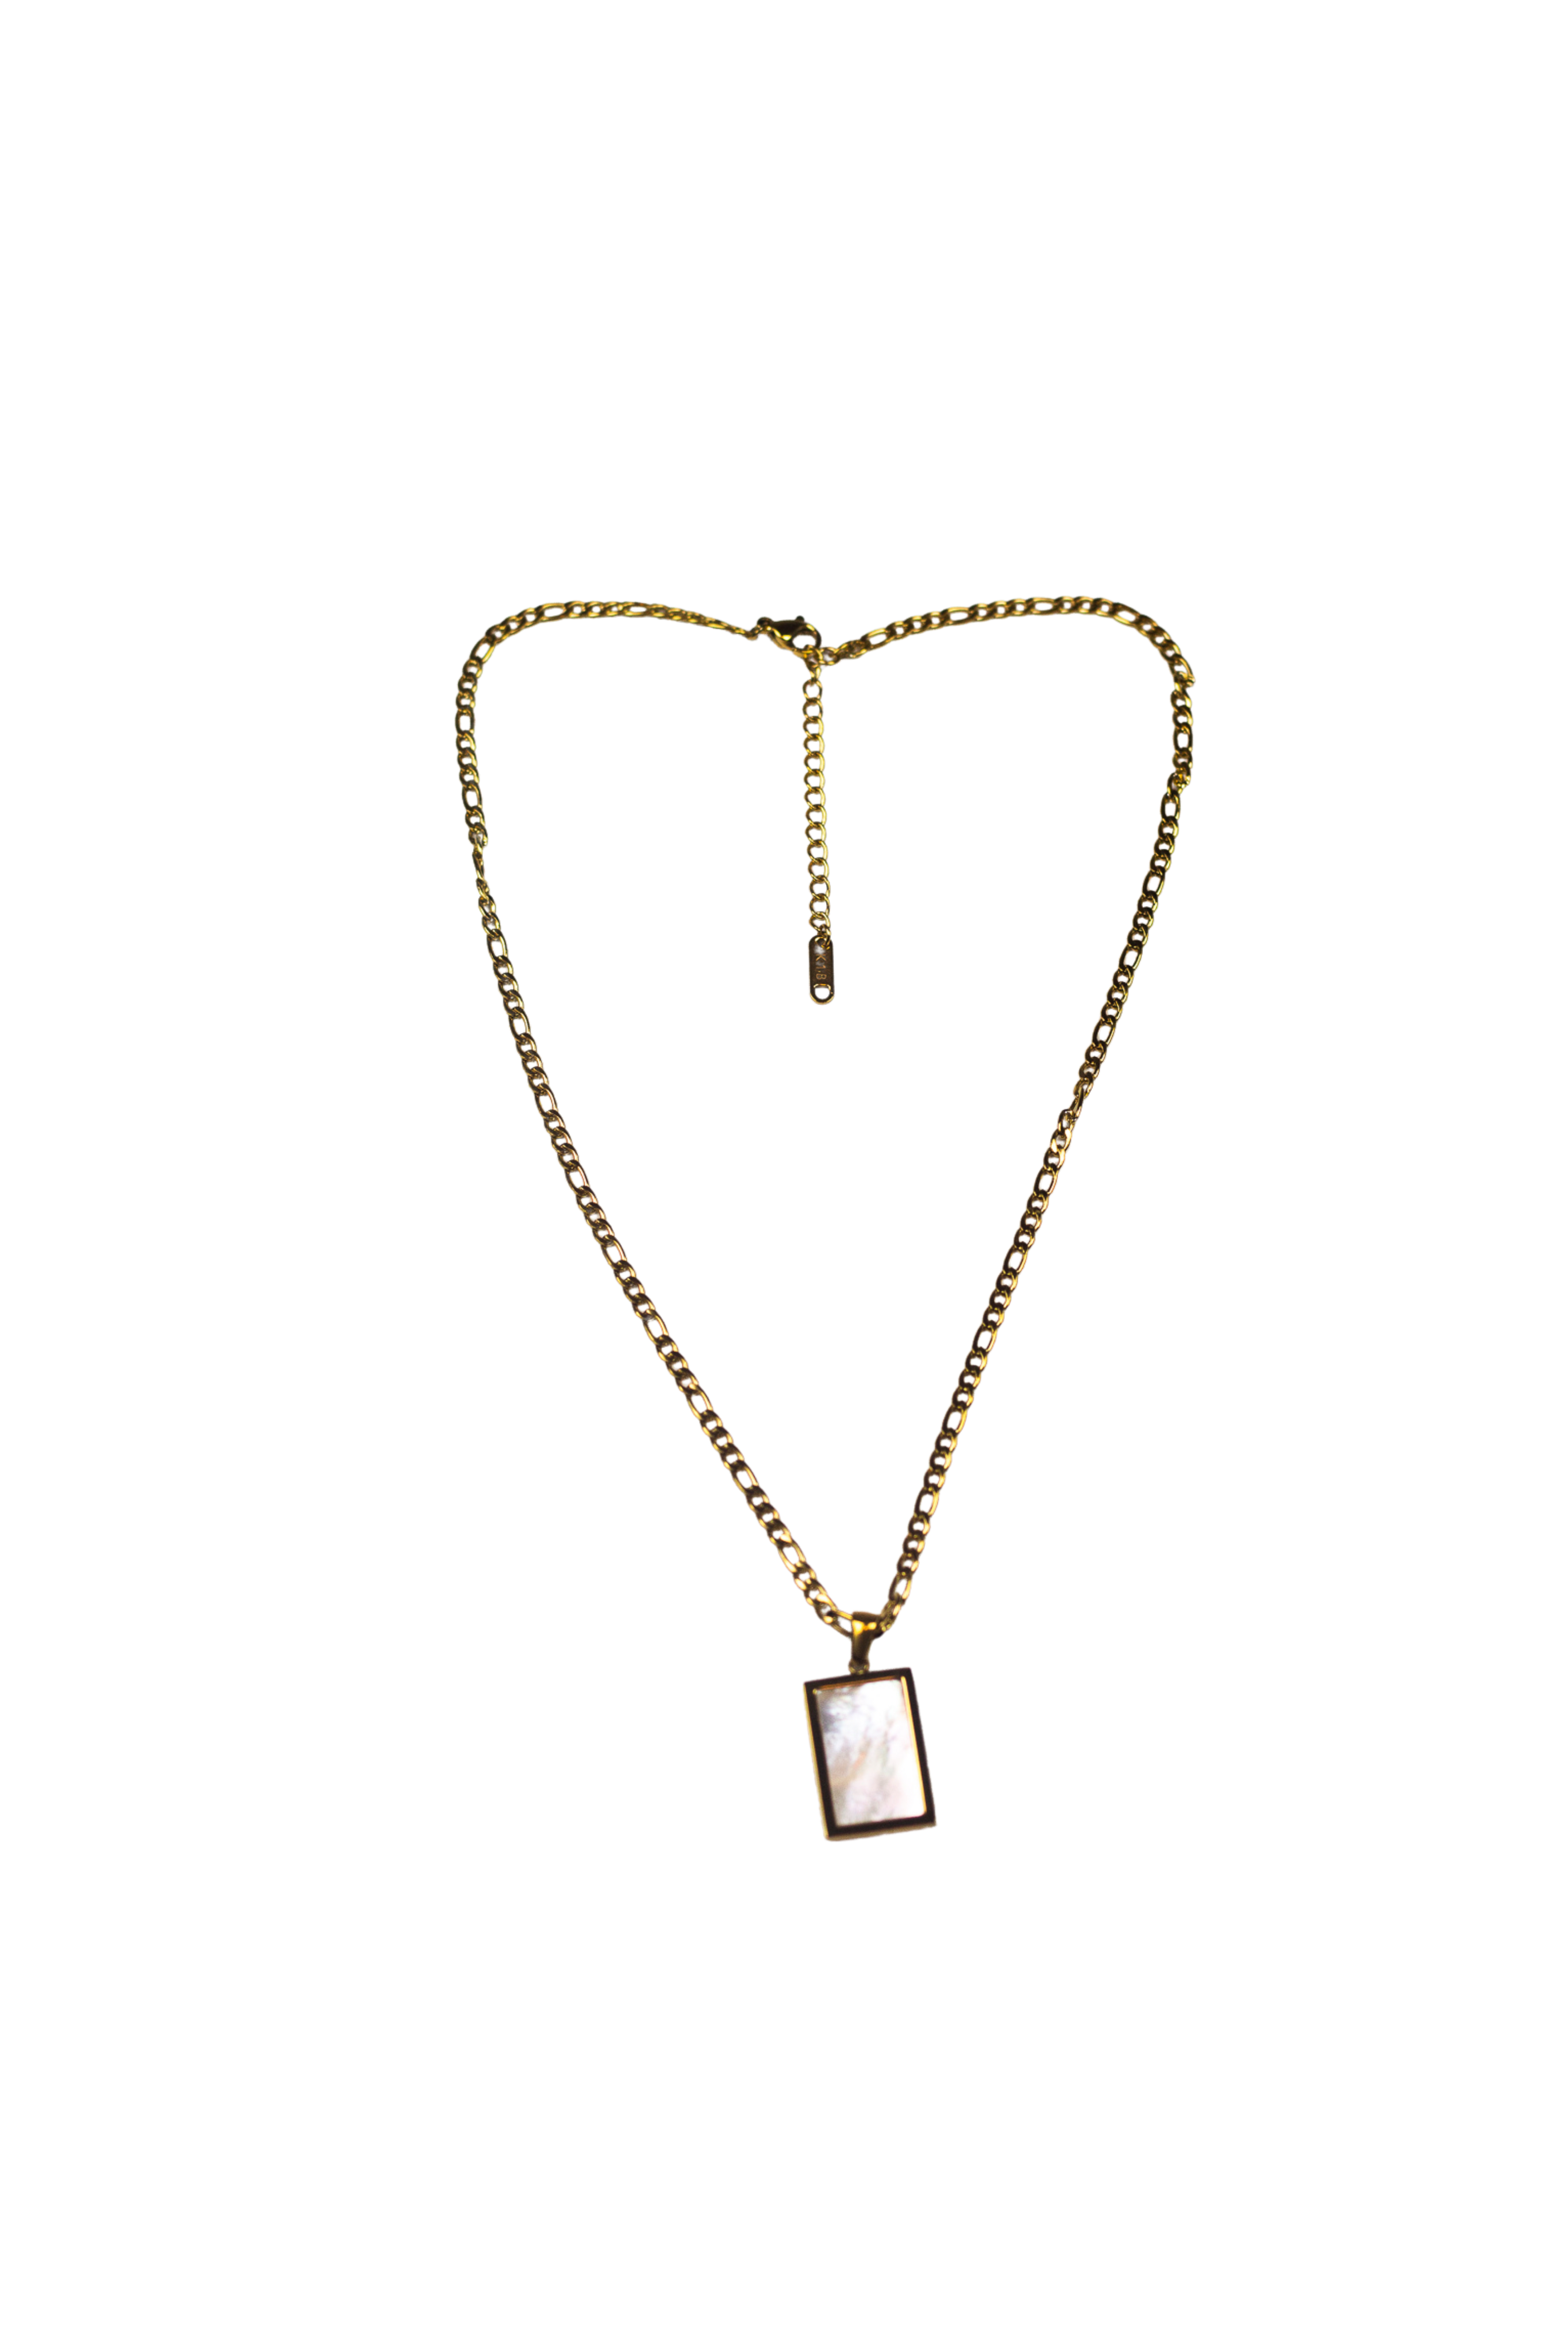 18k gold necklace with a white rectangular charm. The Infinity Zircon Necklace by E's Element.